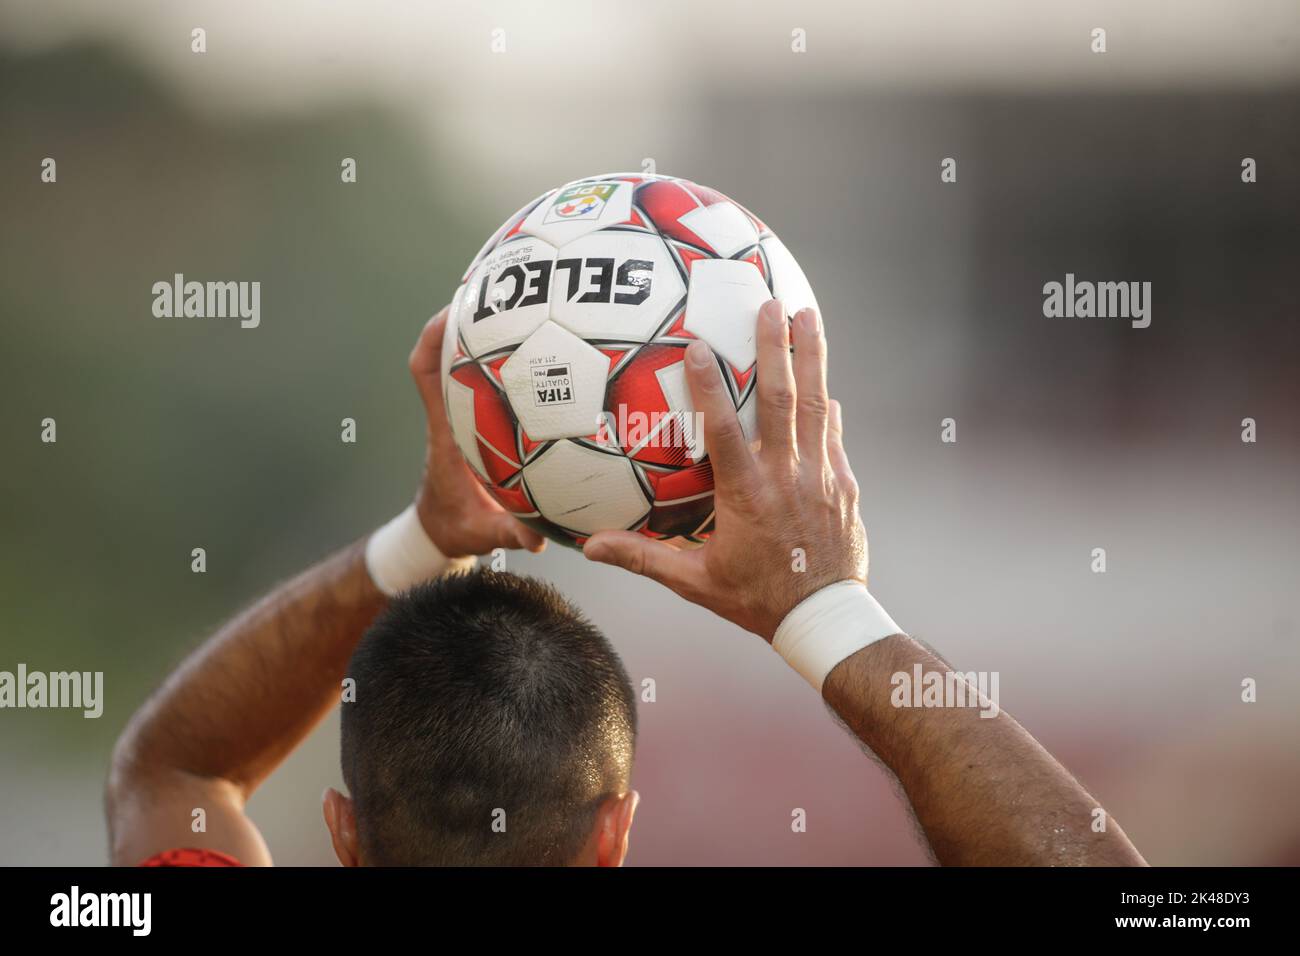 Giurgiu, Romania - June 29, 2020: Select Brillant Super Tb official football ball thrown by a player during a game. Stock Photo